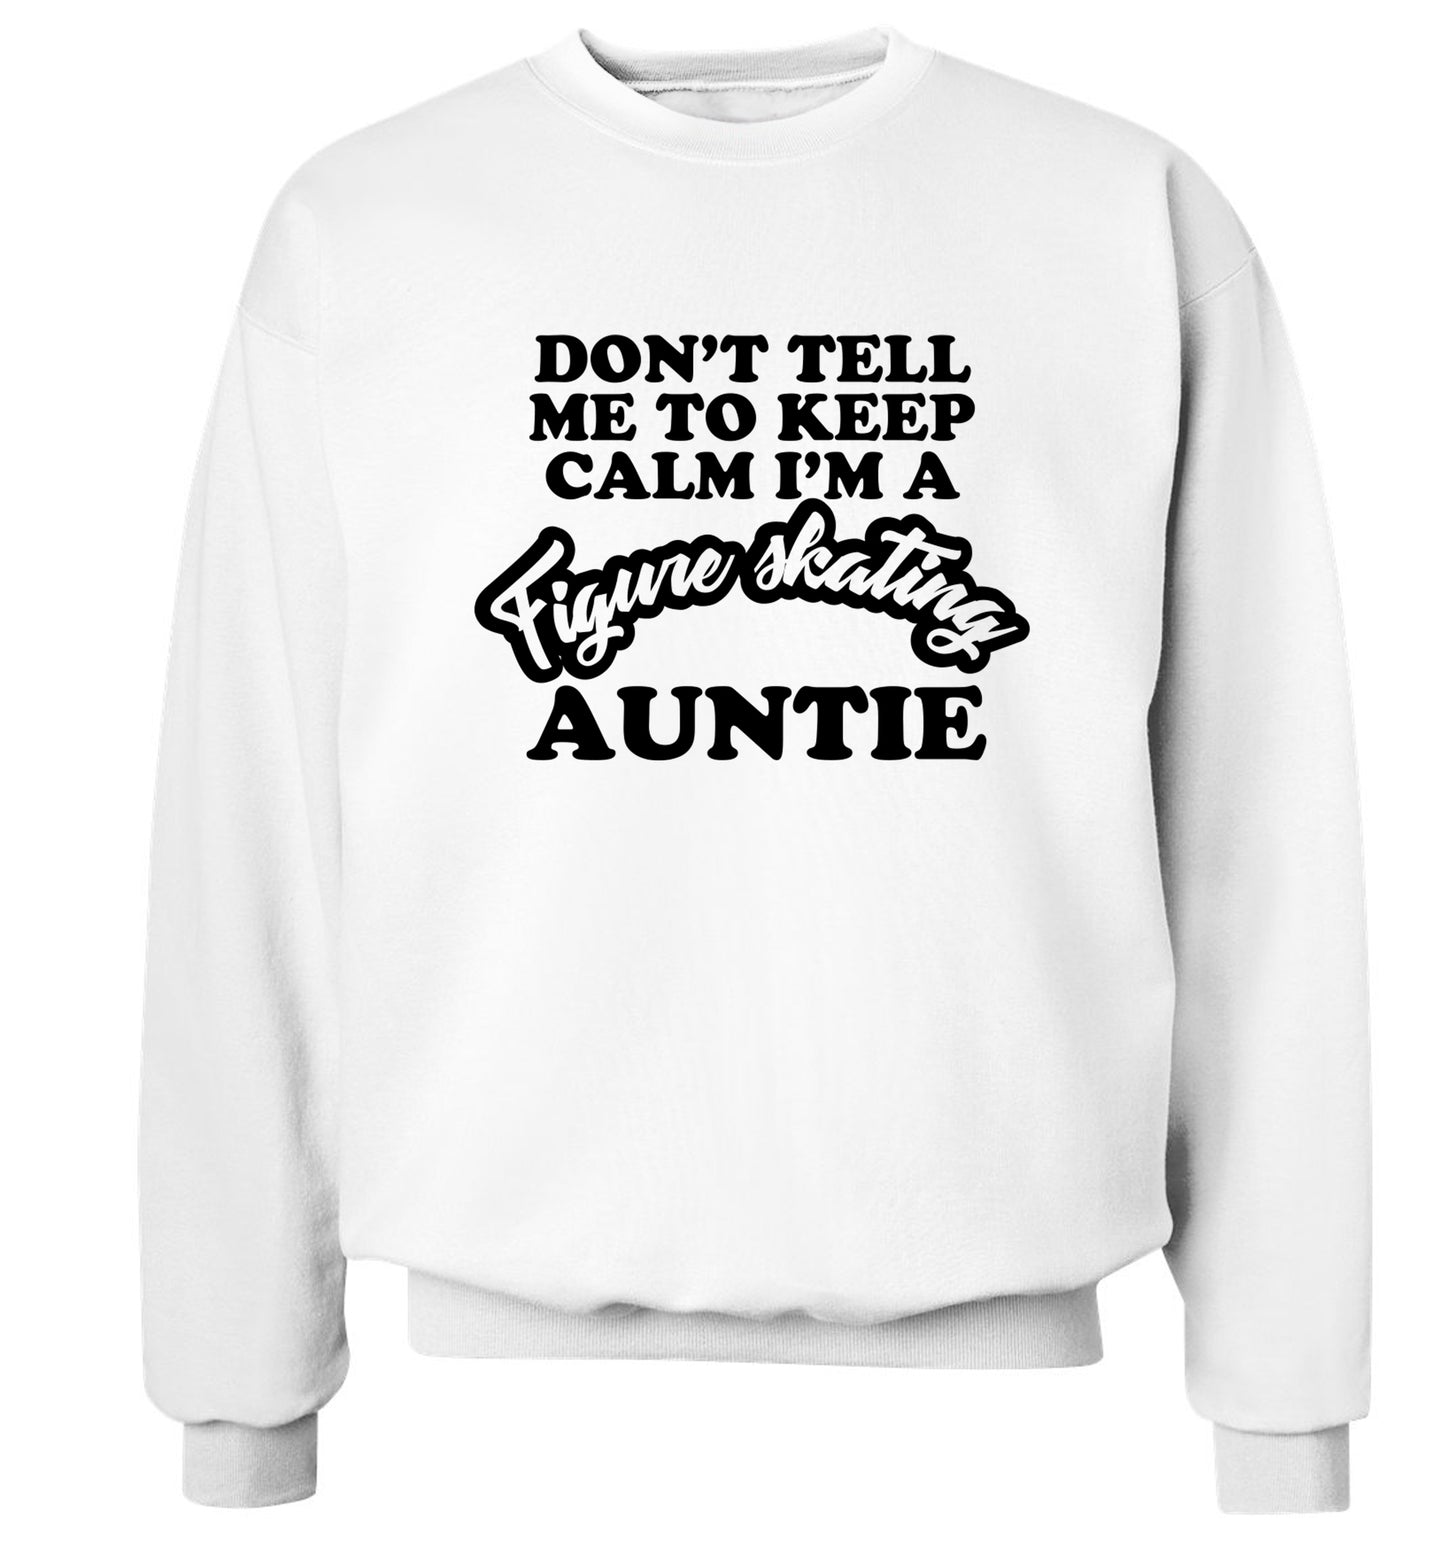 Don't tell me to keep calm I'm a figure skating auntie Adult's unisexwhite Sweater 2XL